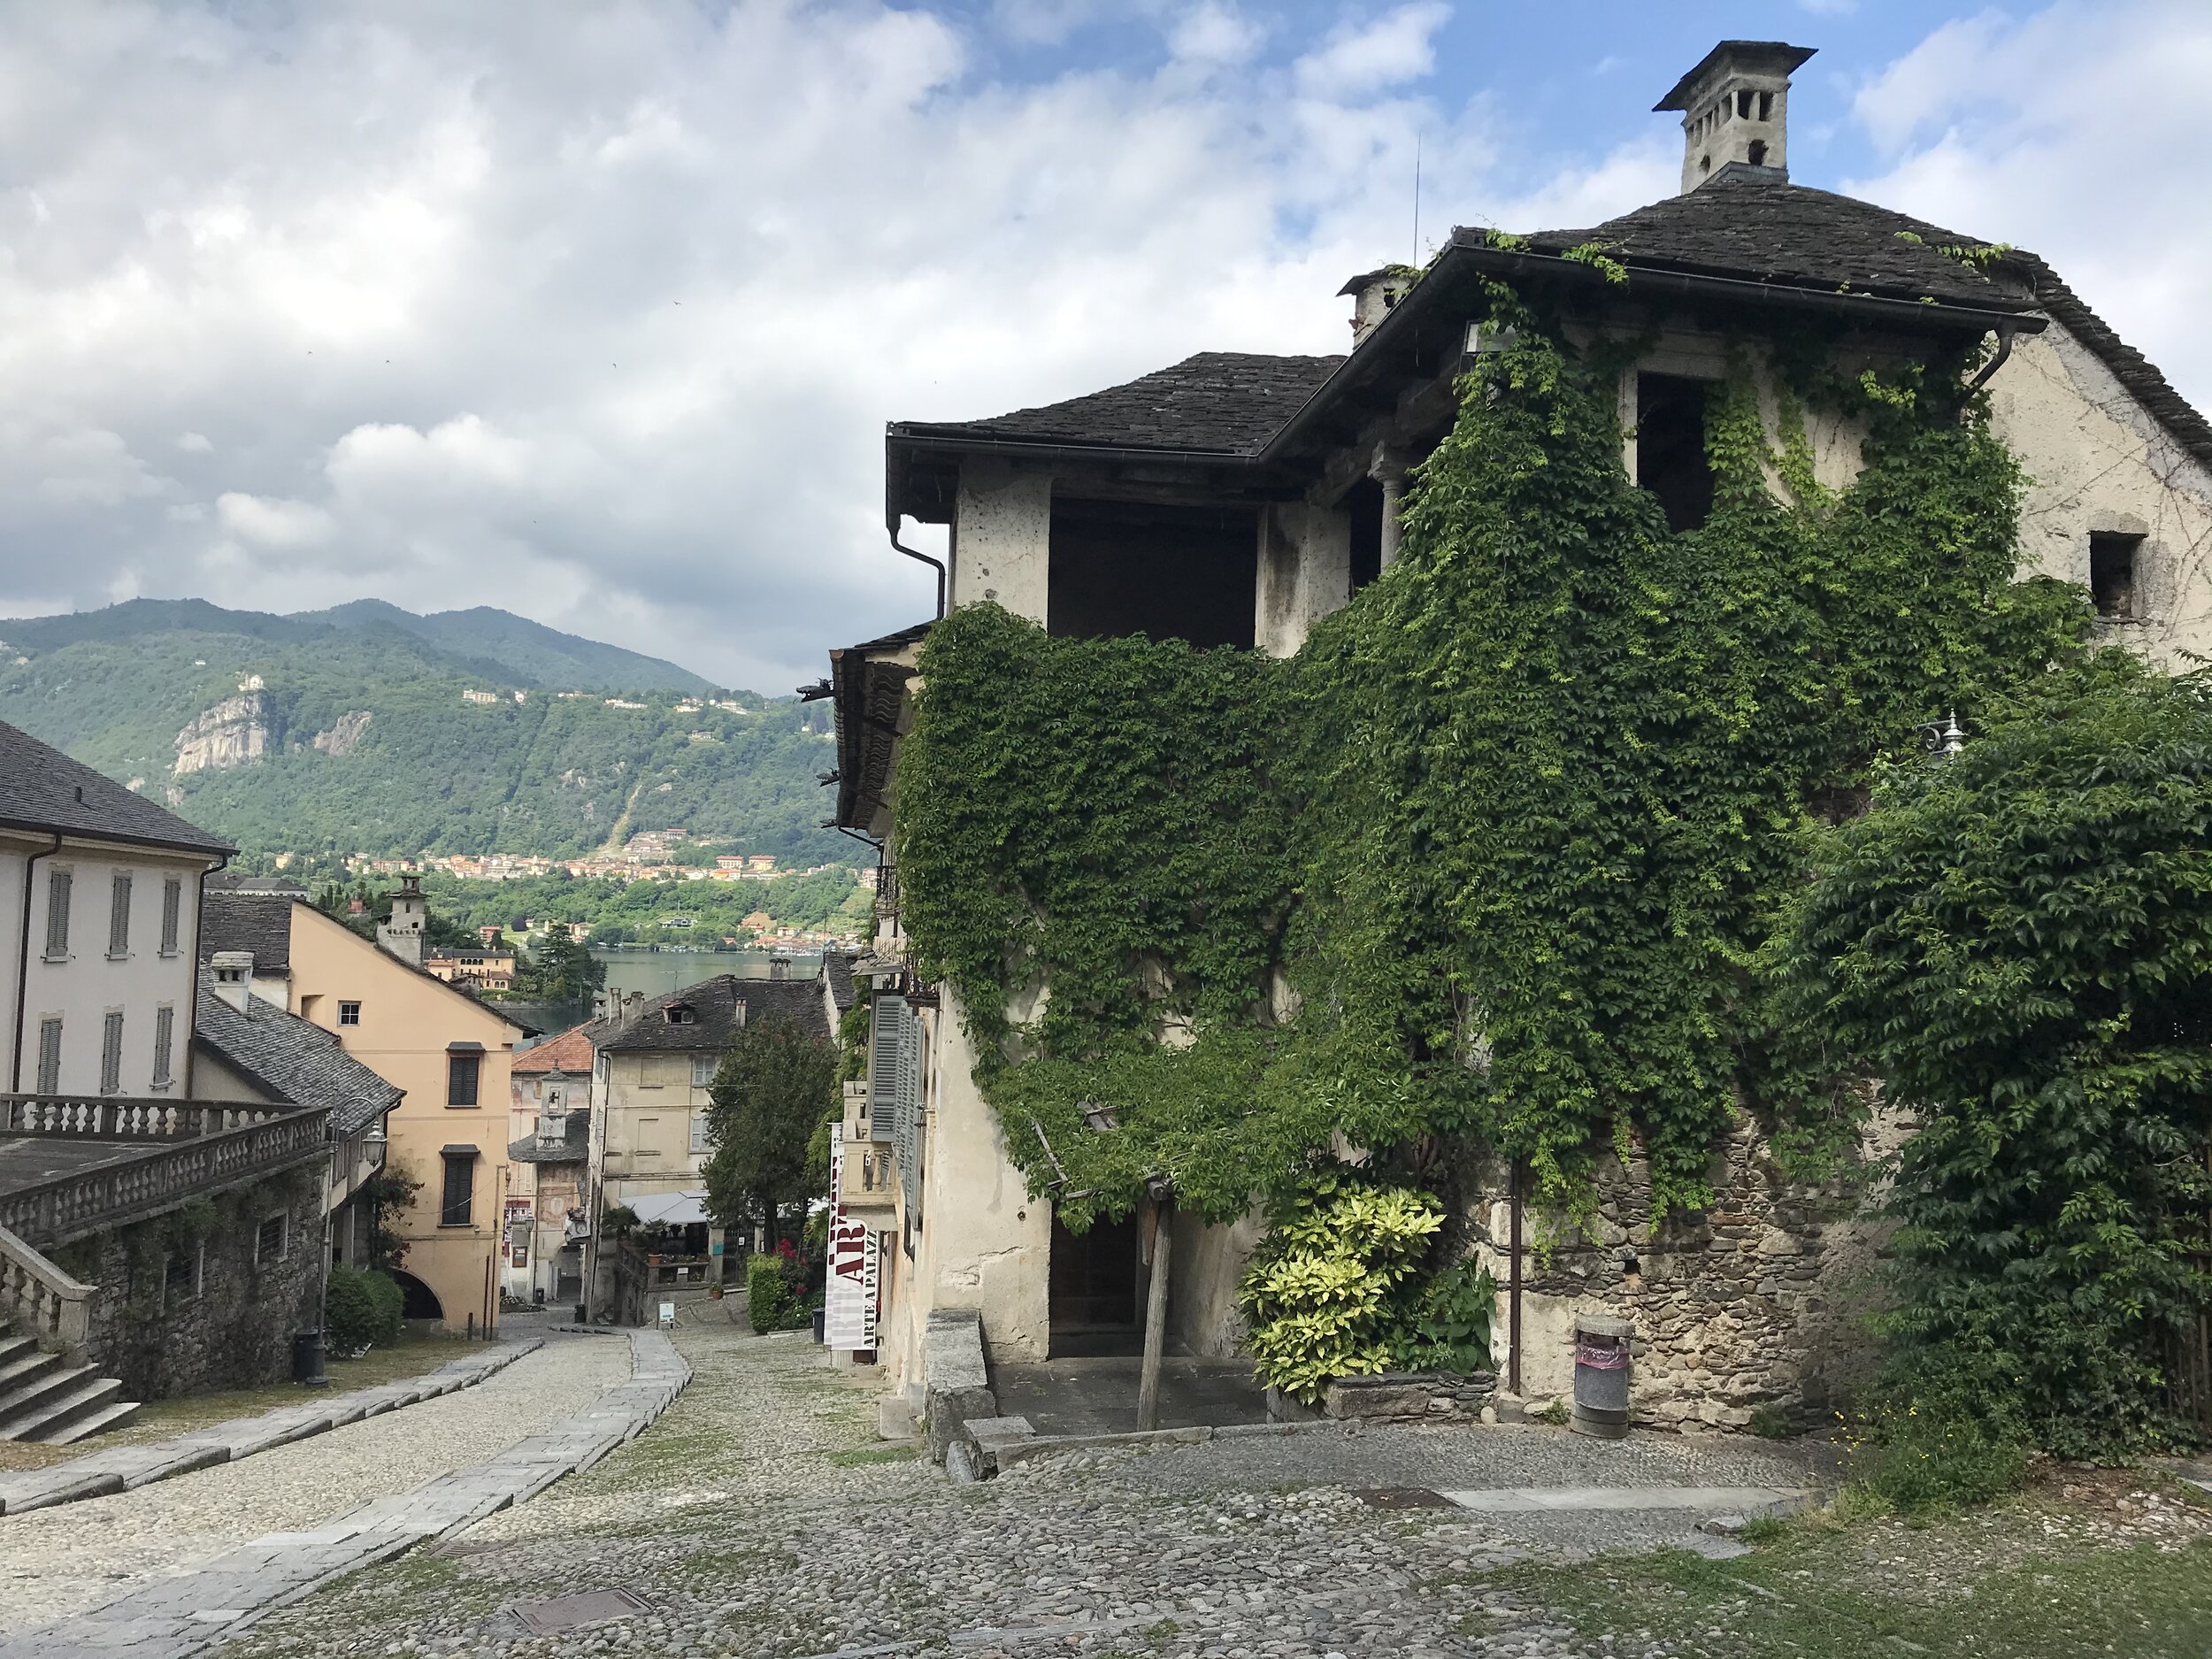 ORTA, Piedmont, Italy. September 10th, 2020. PICTURED: A still-inhabited building from the 19th century, lining a road from the church to Piazza Motta, enjoys a blanket of wisteria vine over its stone and wooden facade.